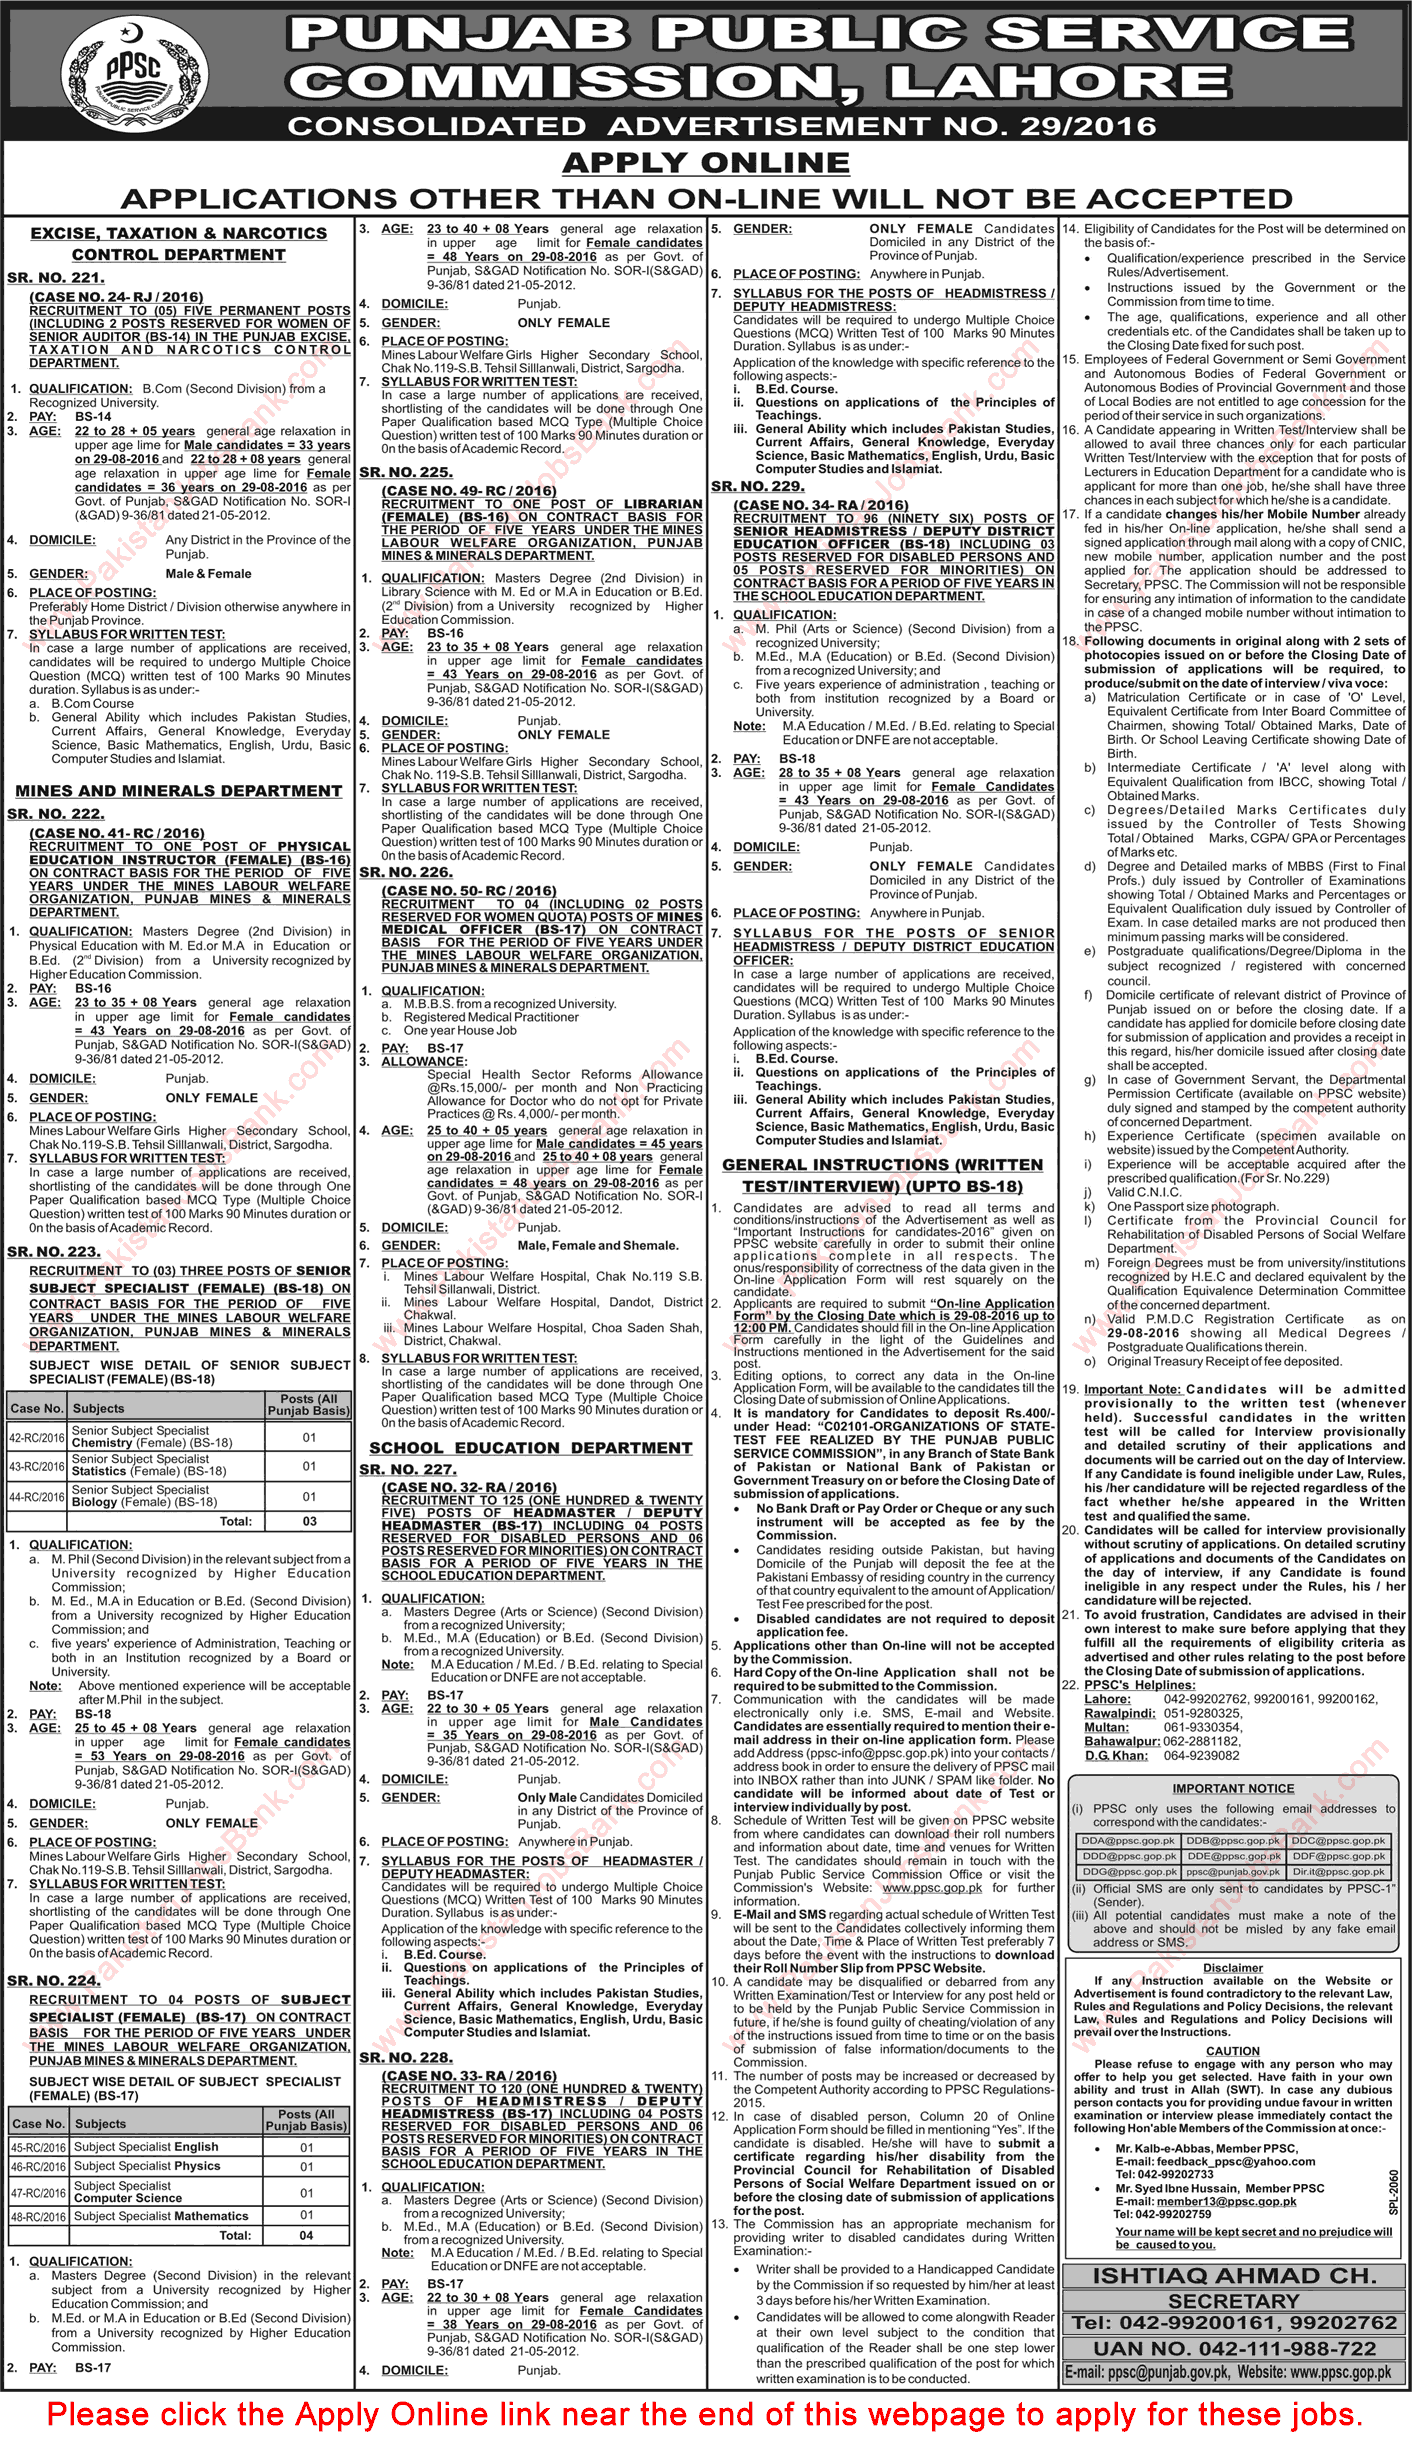 PPSC Jobs August 2016 Consolidated Advertisement No 29/2016 Apply Online Latest